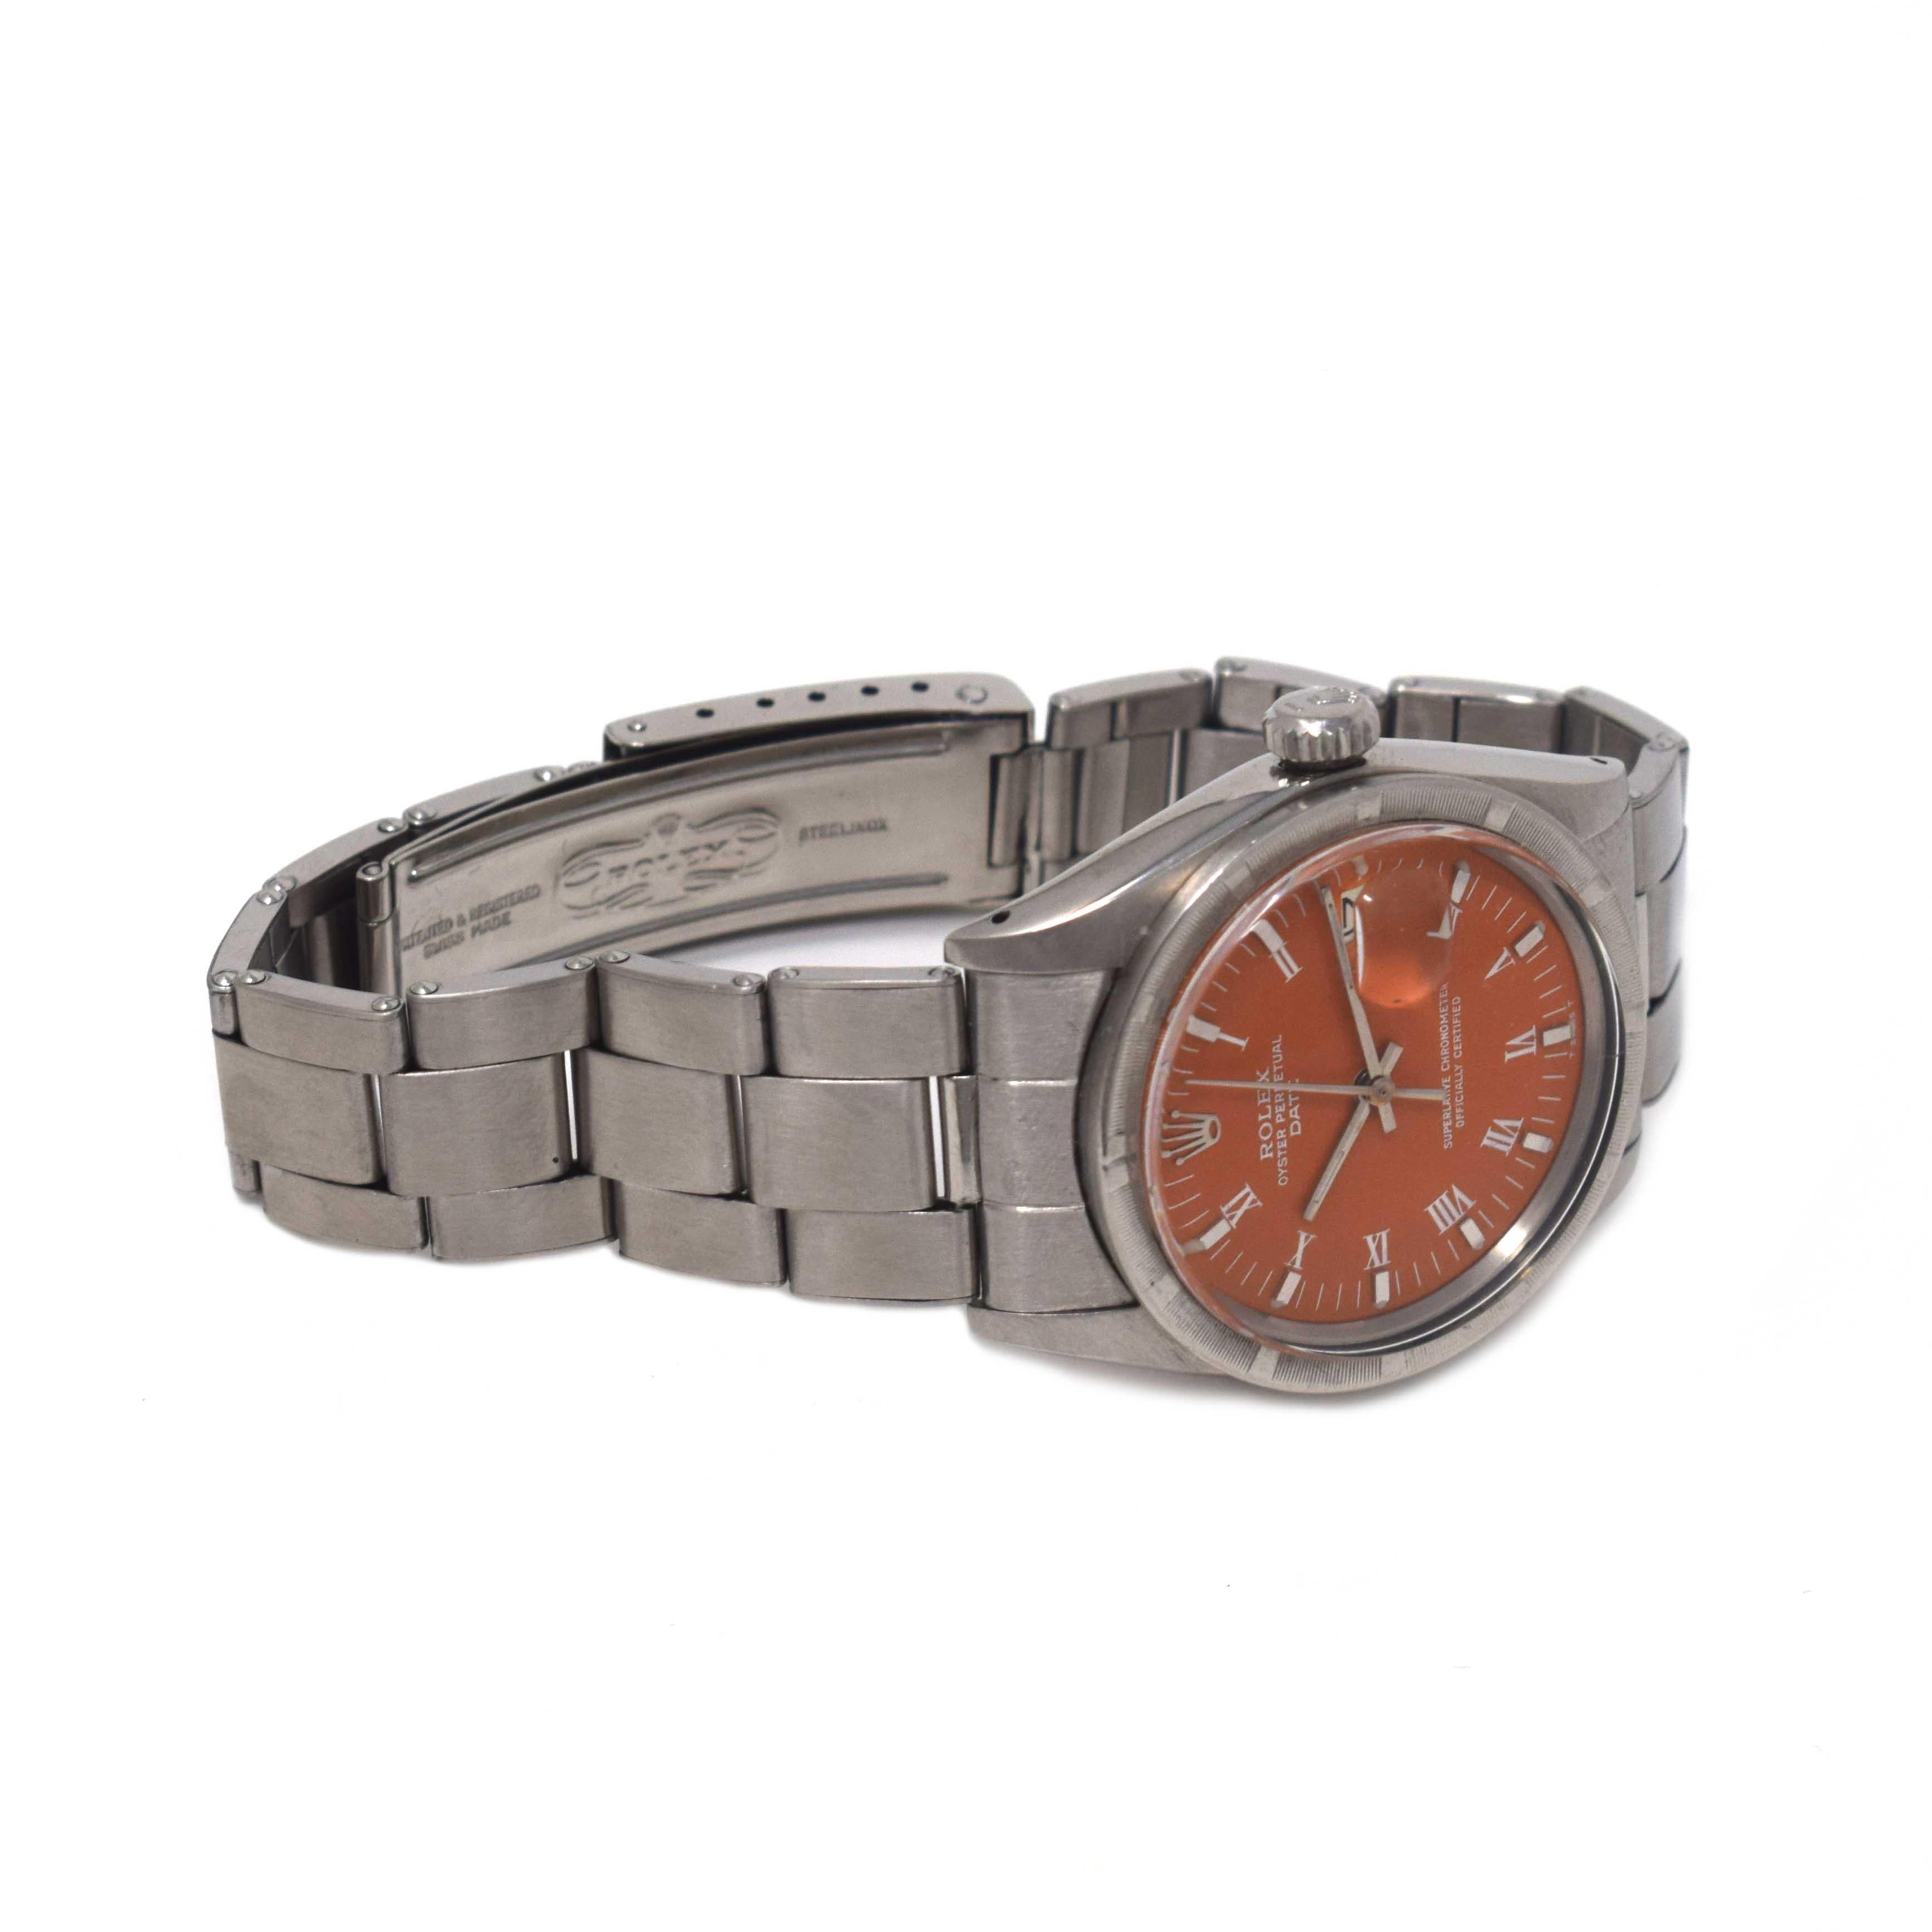 Brilliance Jewels, Miami
Questions? Call Us Anytime!
786,482,8100

Brand: Rolex

Model Number: 1501

Model Name:  Date

Serial Number:  3,7** (either 1974)

Movement: Automatic

Case Size:  34 mm

Dial Color: Orange

Dial: Roman Numerals 

Bracelet